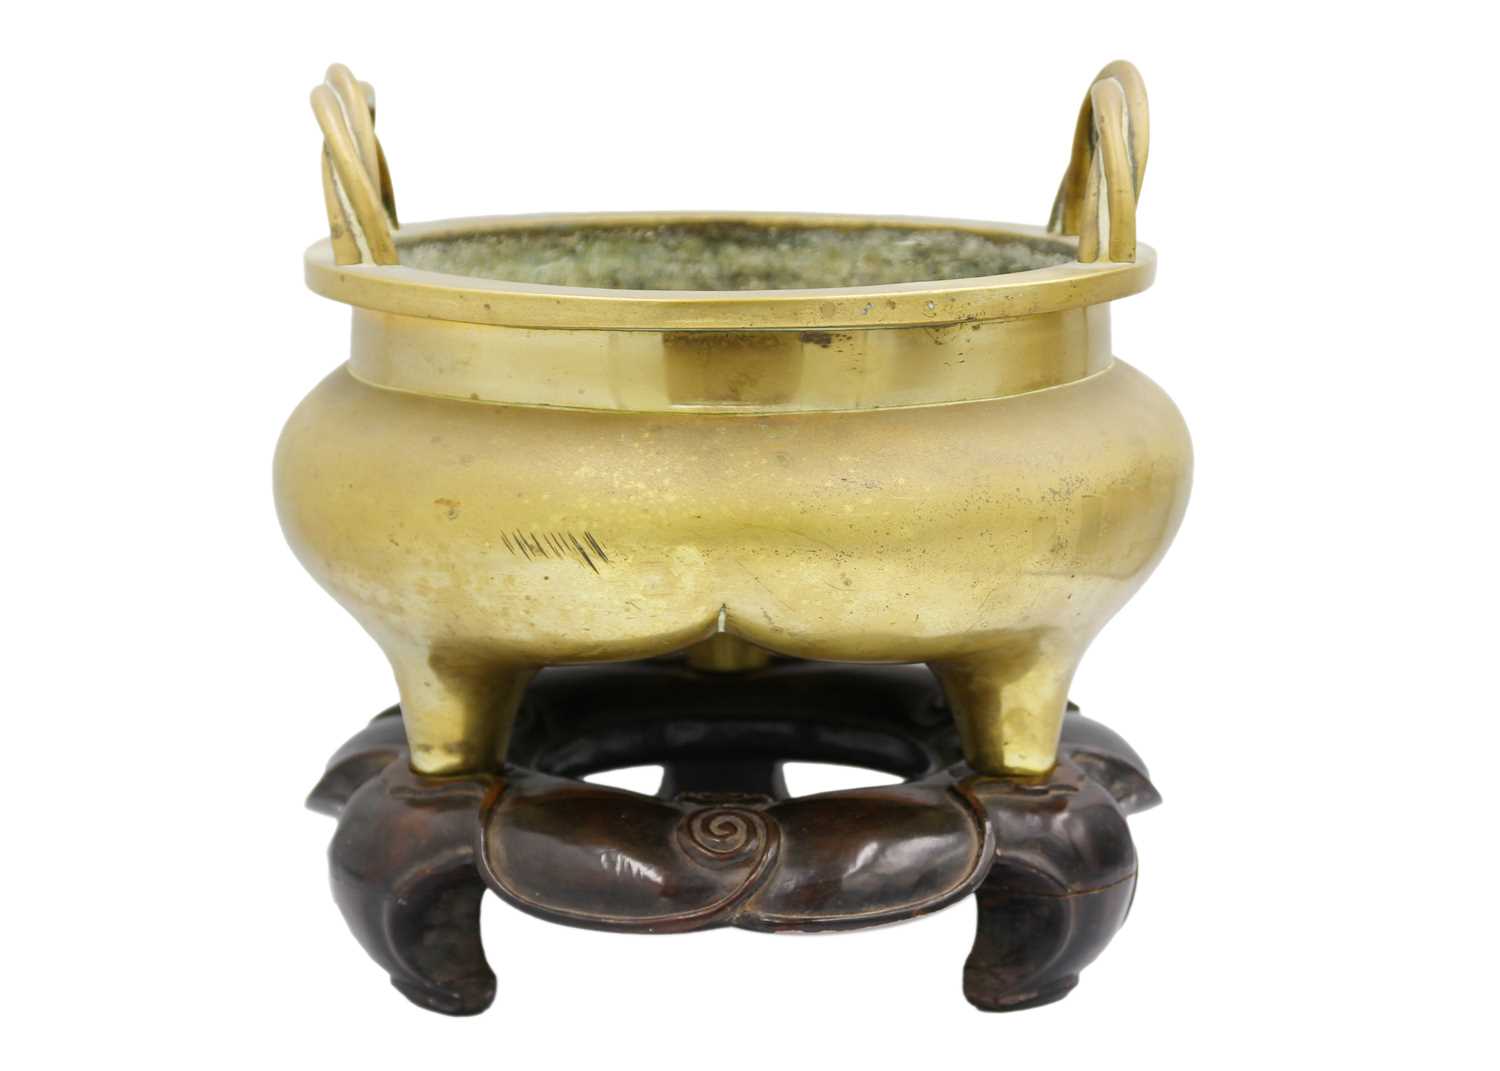 Lot 66 - A large Chinese bronze twin-handled tripod censer on stand, Qing Dynasty.